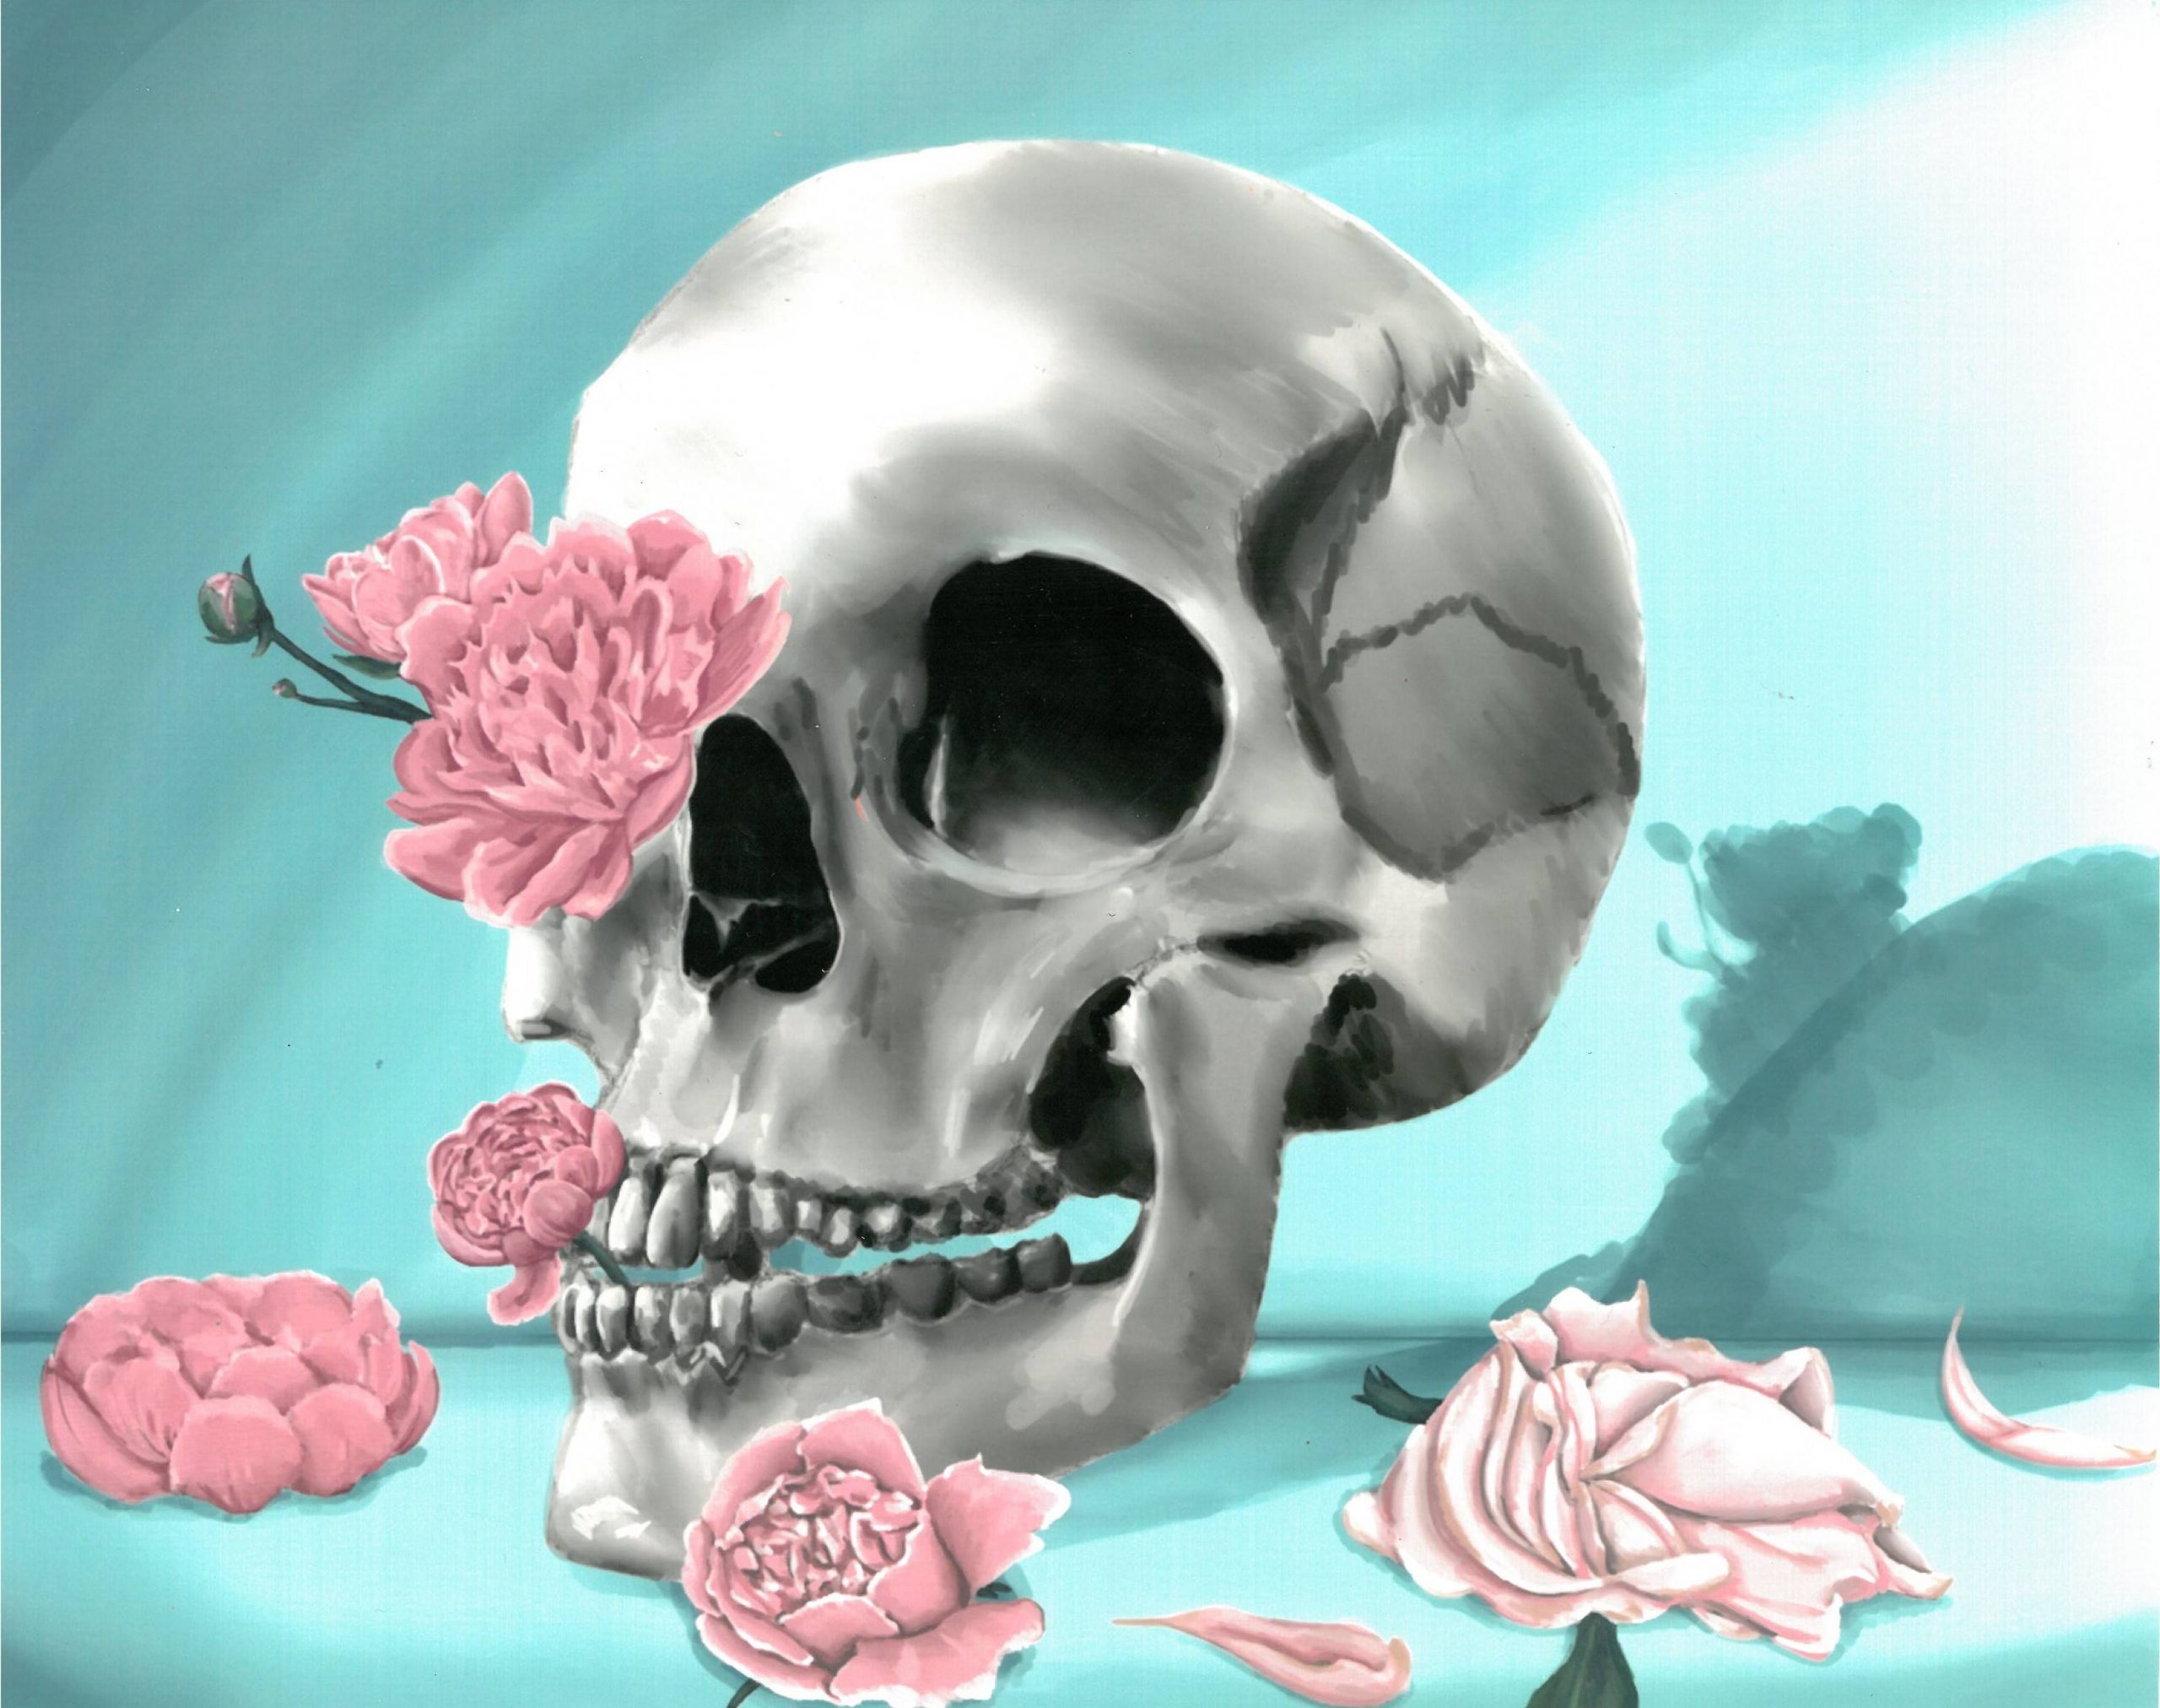 A skull with pink flowers